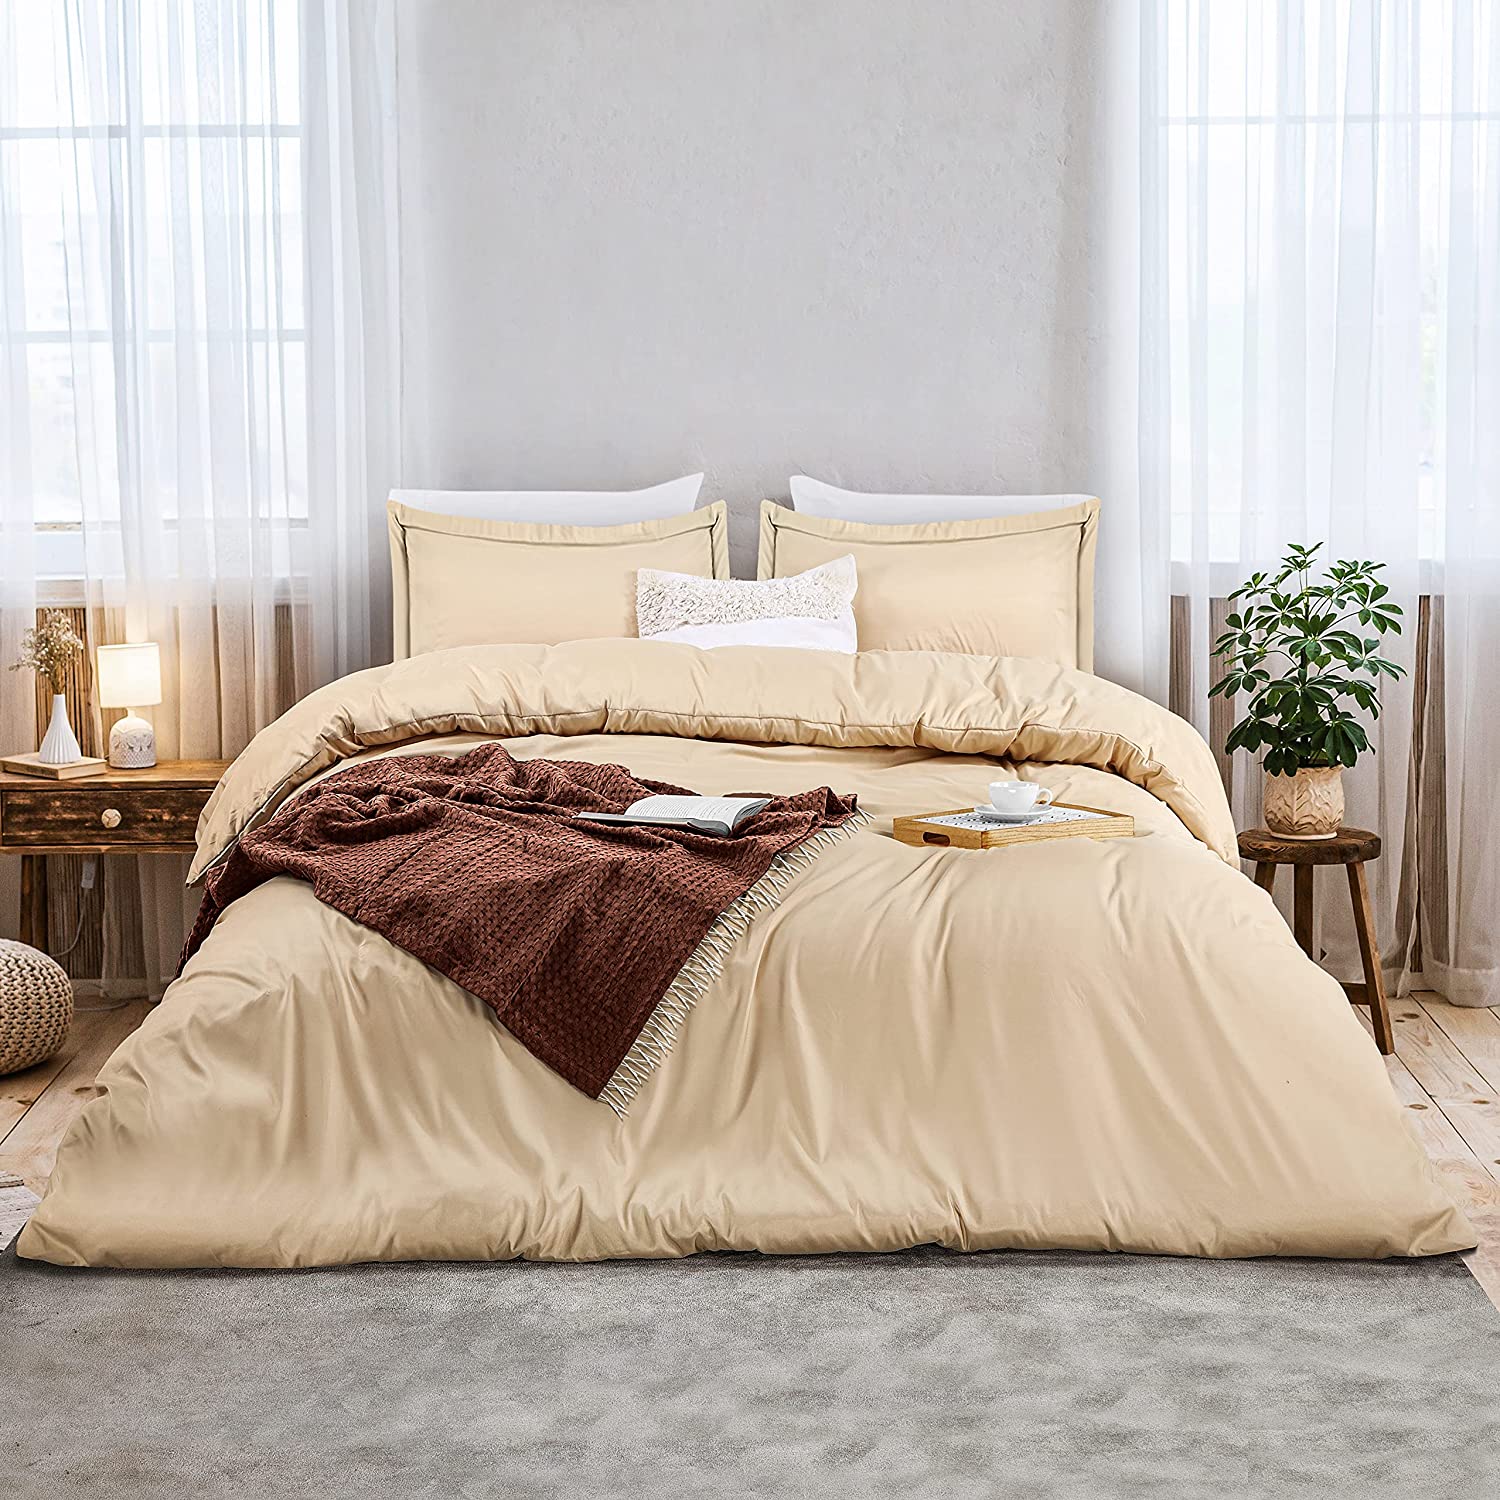 Utopia Bedding Duvet Cover Queen Size Set - 1 Duvet Cover with 2 Pillow  Shams - 3 Pieces Comforter Cover with Zipper Closure - Ultra Soft Brushed